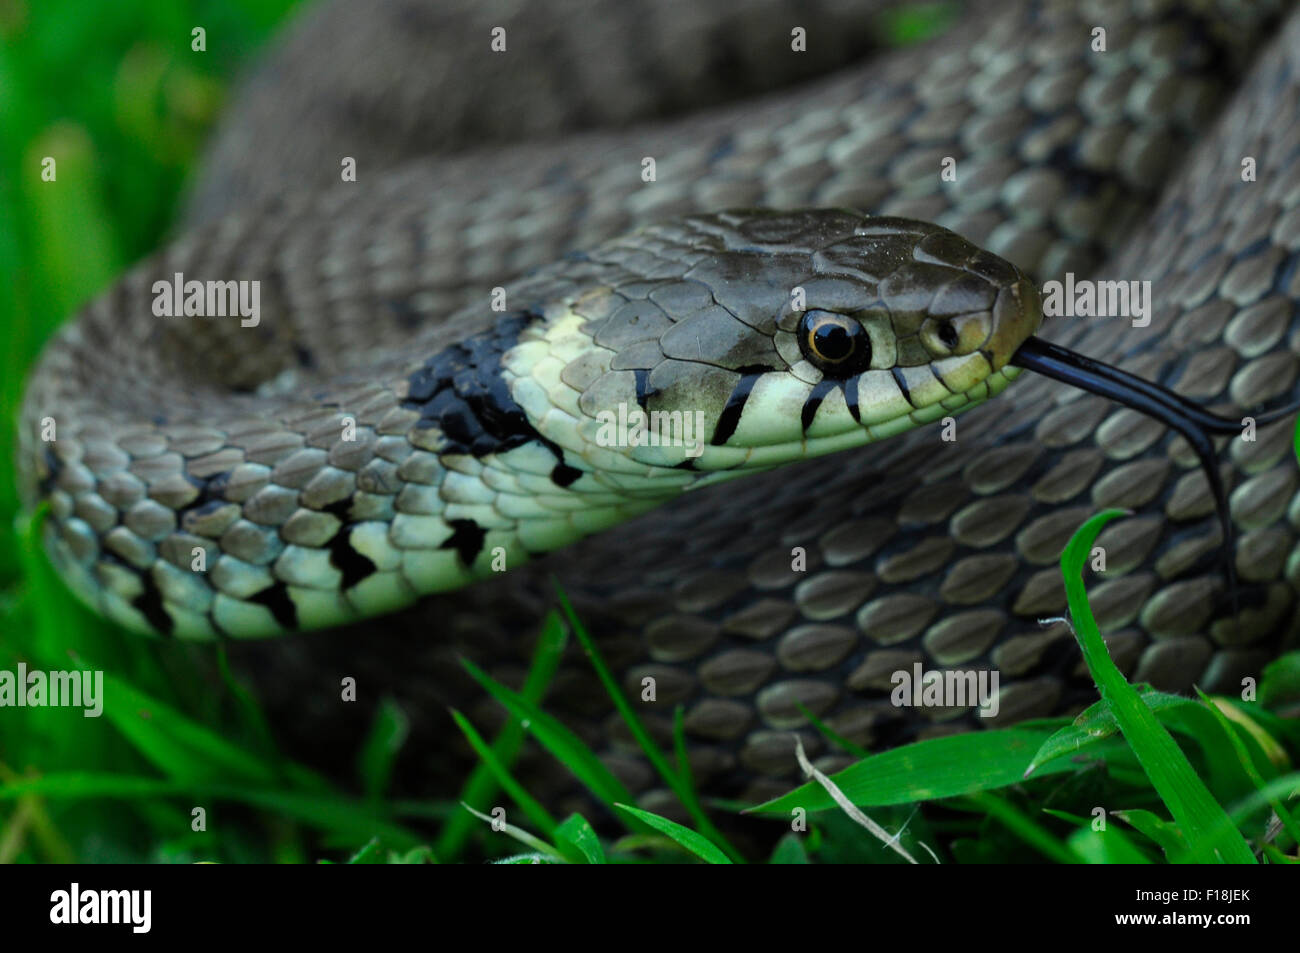 A close-up of a grass snake in grass UK Stock Photo